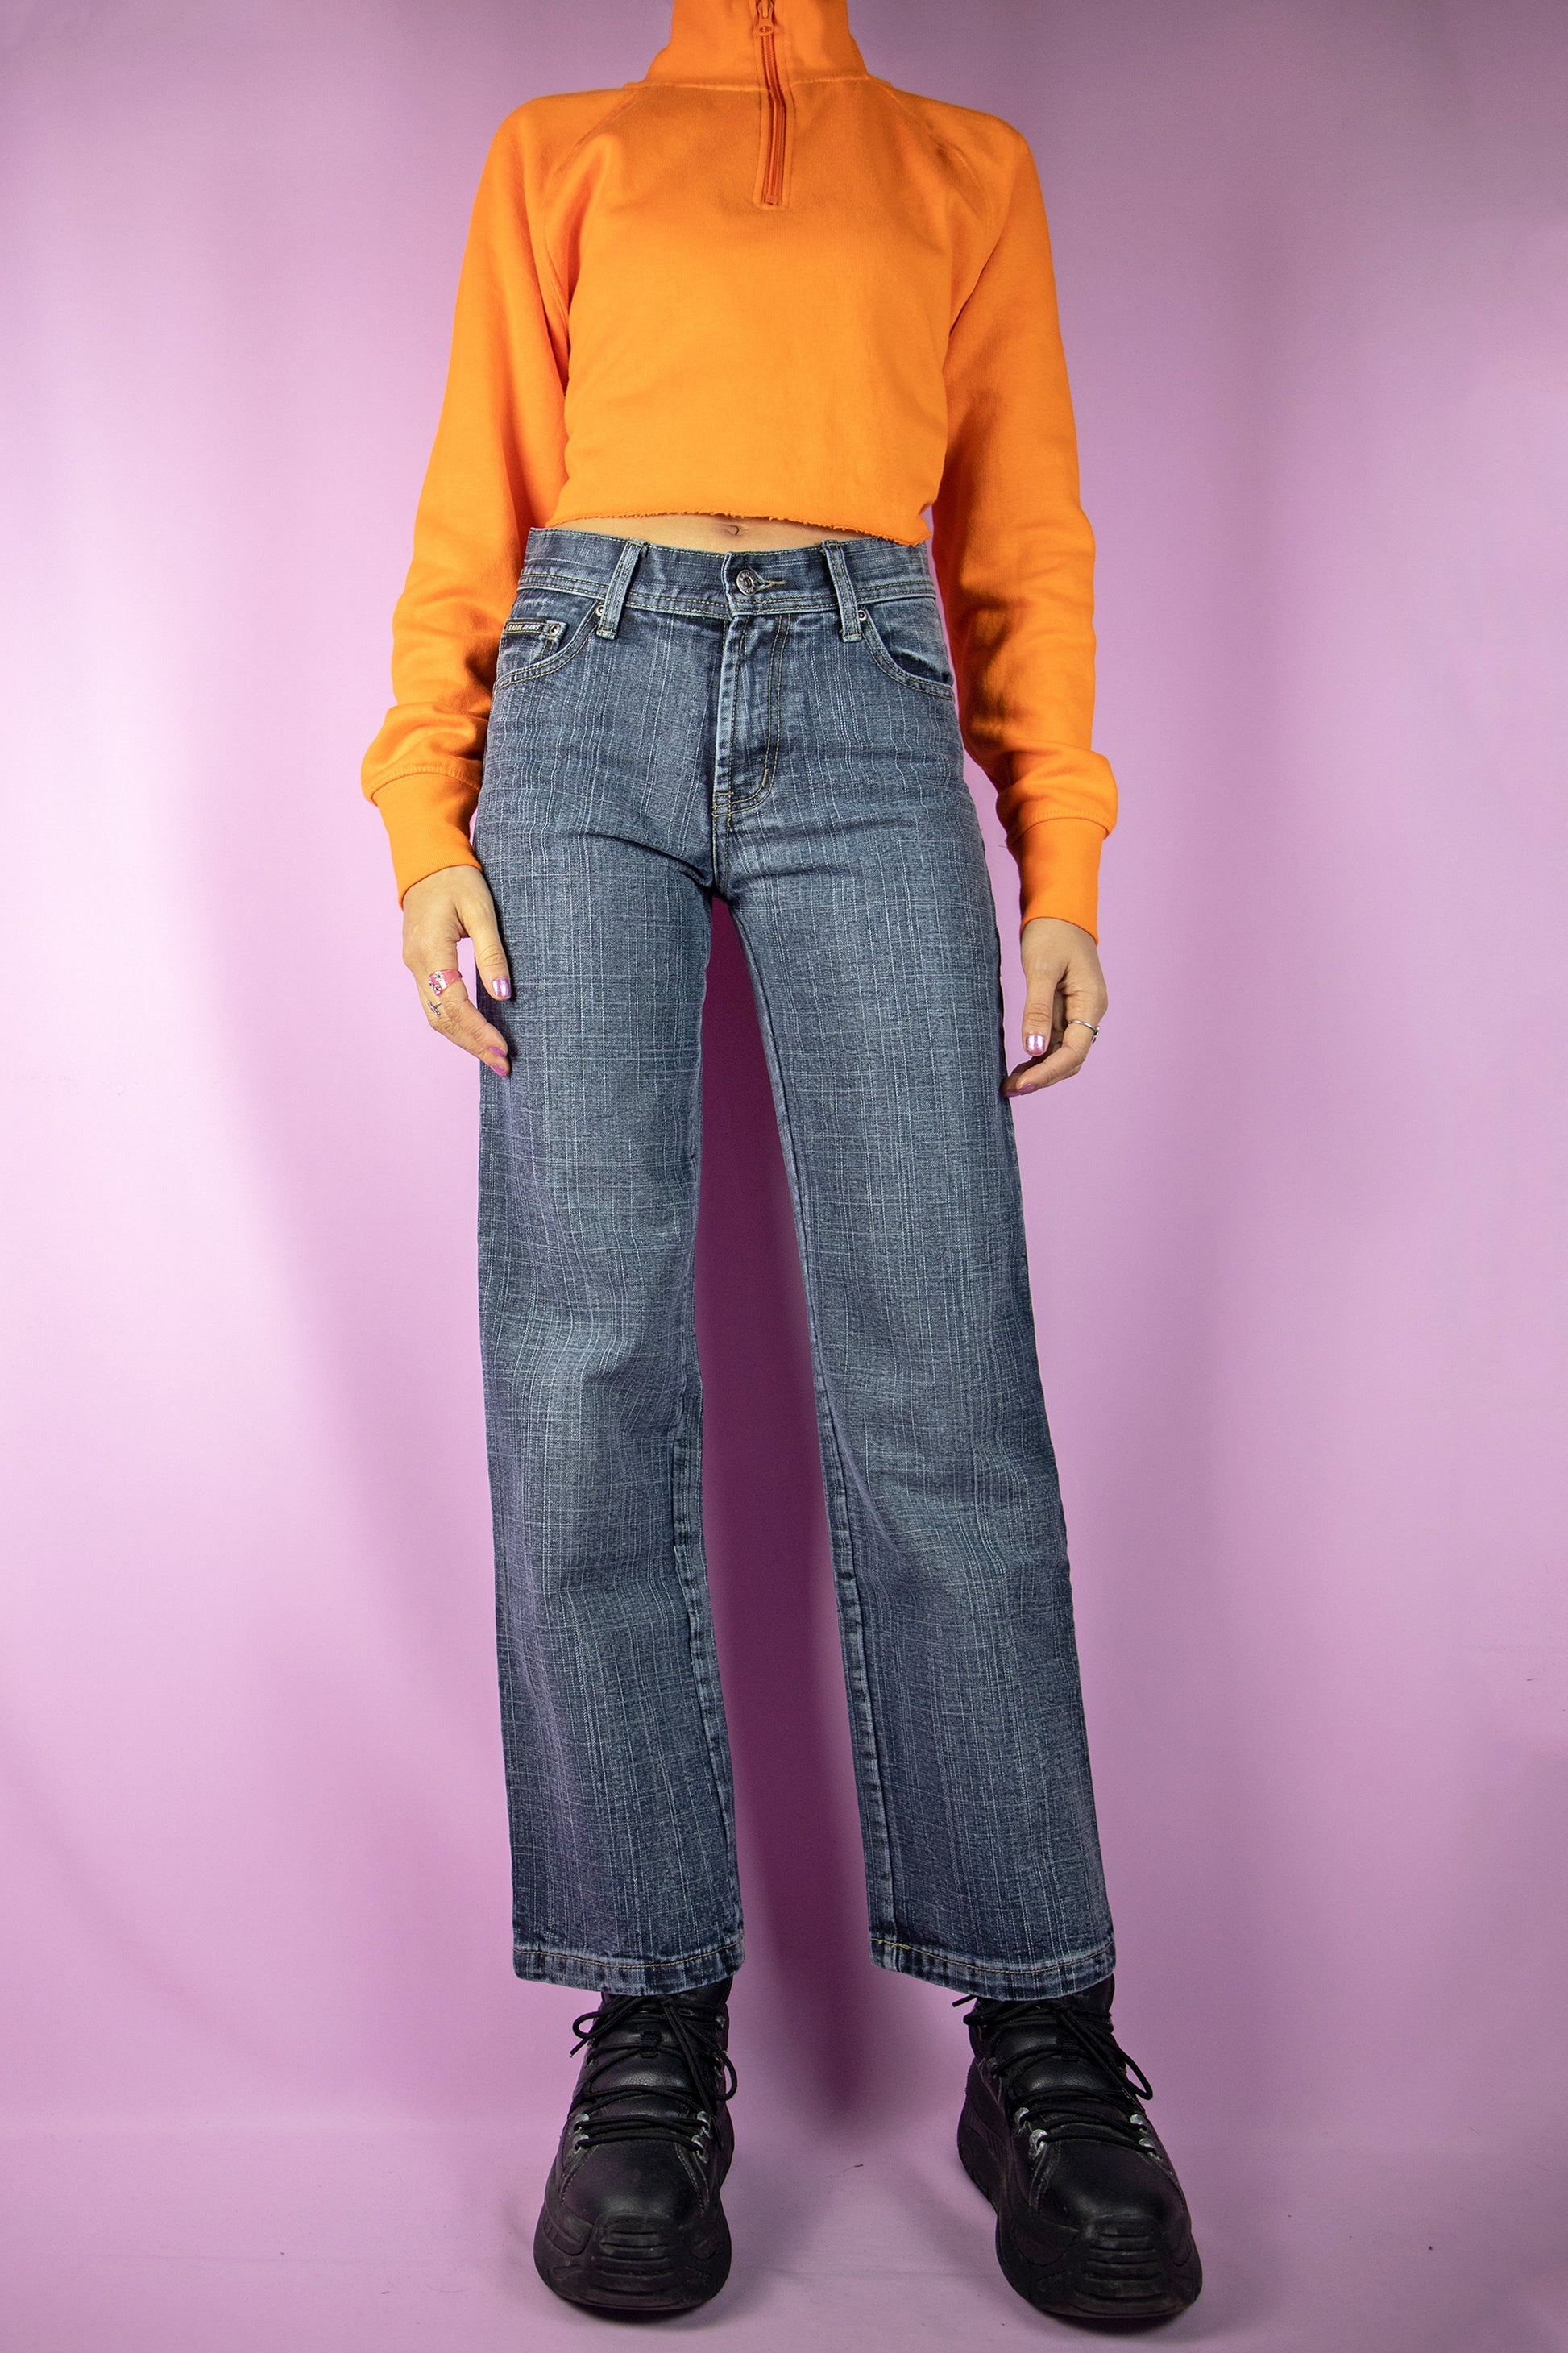 The Y2K Mid Rise Wide Jeans are dark wash mid-rise wide-leg pants. Cyber grunge gorpcore 2000s denim trousers.